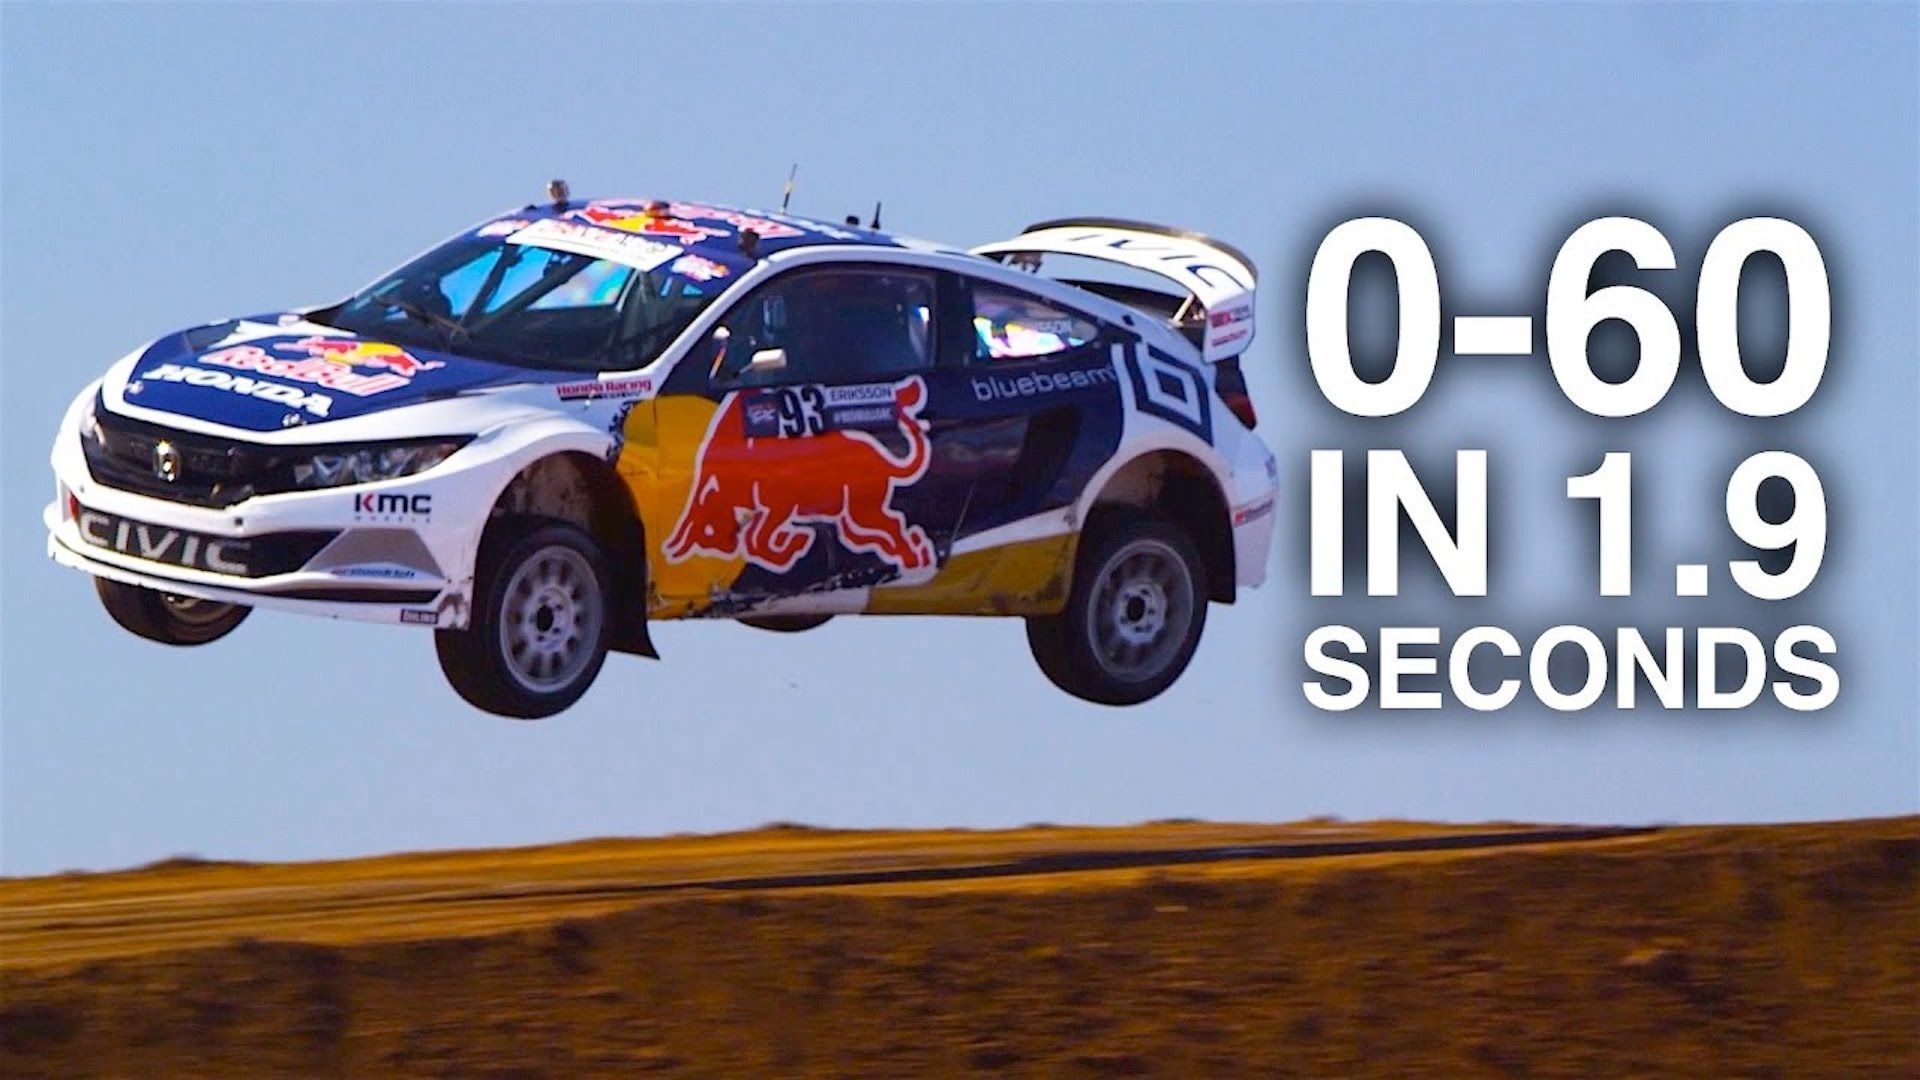 How Global Rallycross cars hit 60 mph in 1.9 seconds